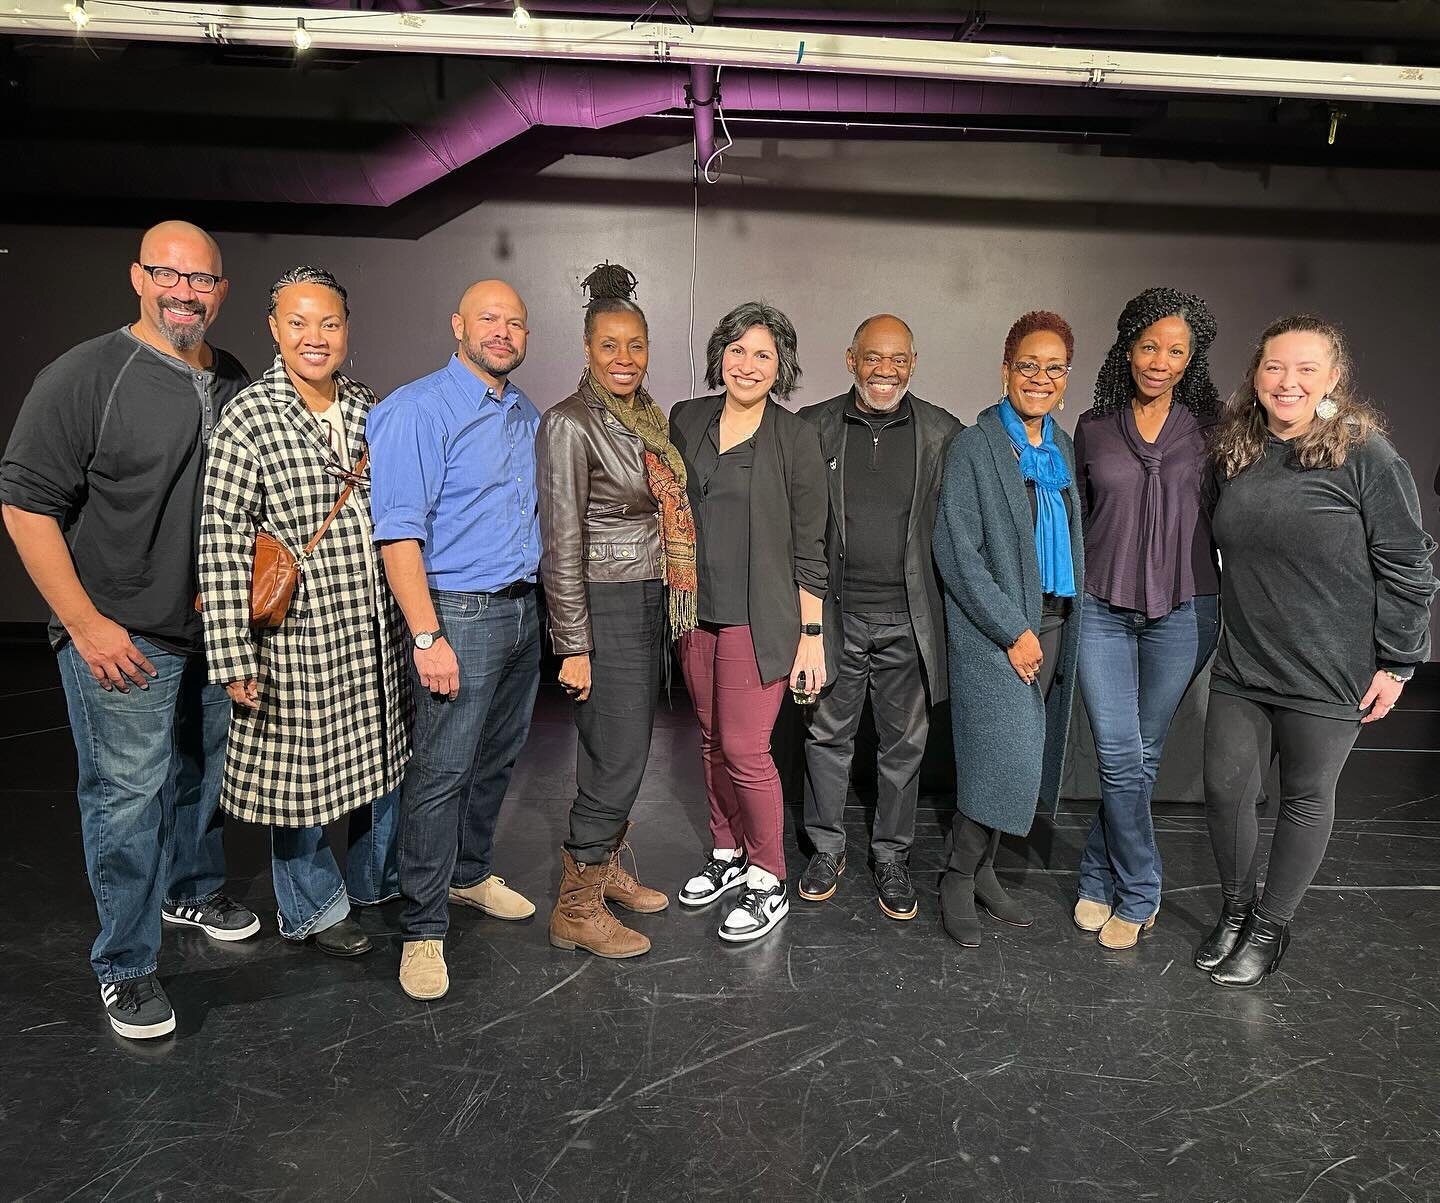 About last week&hellip;
We are incredibly grateful for all who attended our staged readings of @lolita.chakrabarti&rsquo;s HYMN at @anoisewithin. We all engaged in a thoughtful and inspiring dialogue after each performance and are excited to see wher